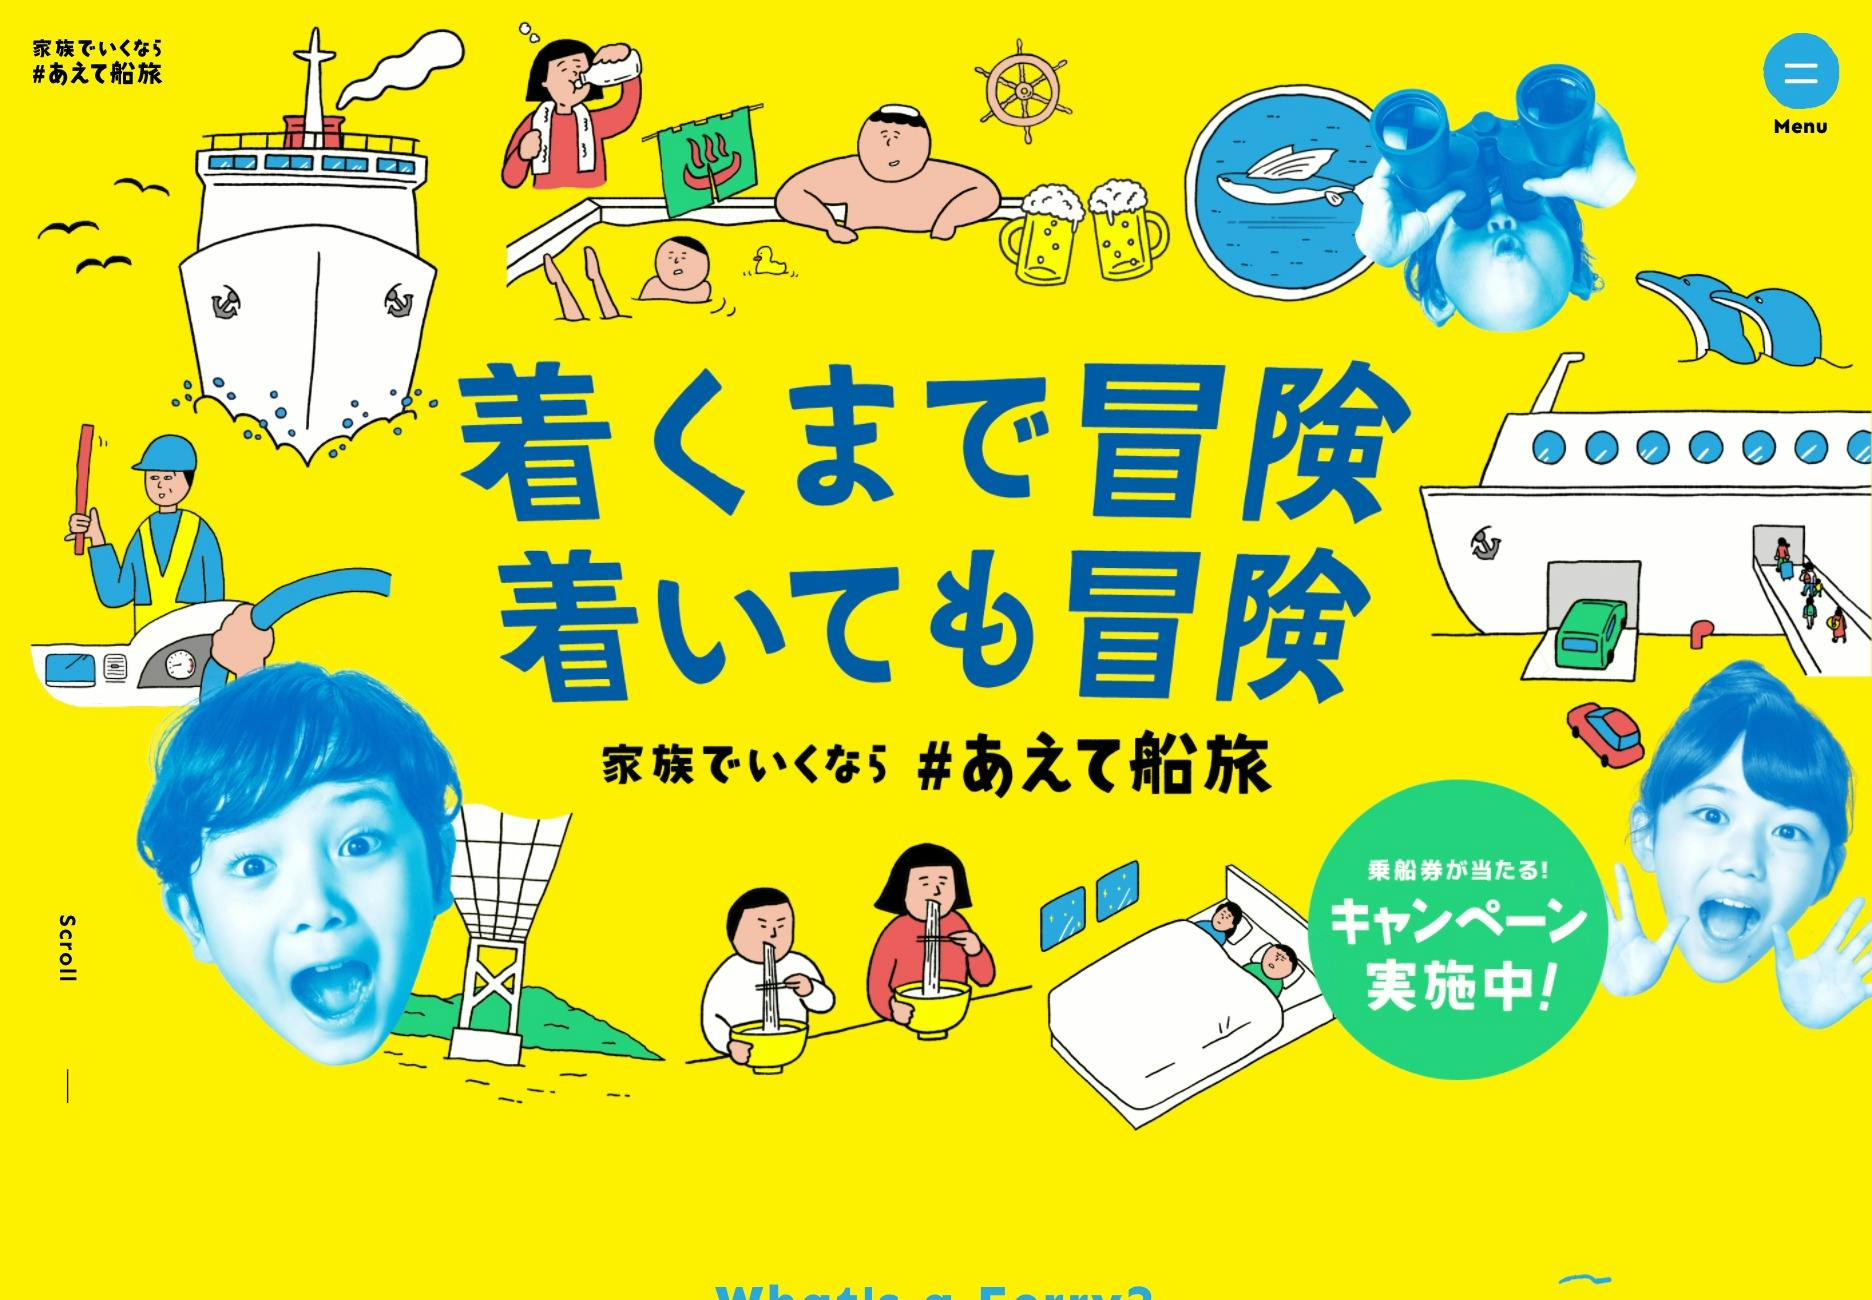 Cover Image for 家族でいくなら＃あえて船旅｜阪神国際港湾株式会社